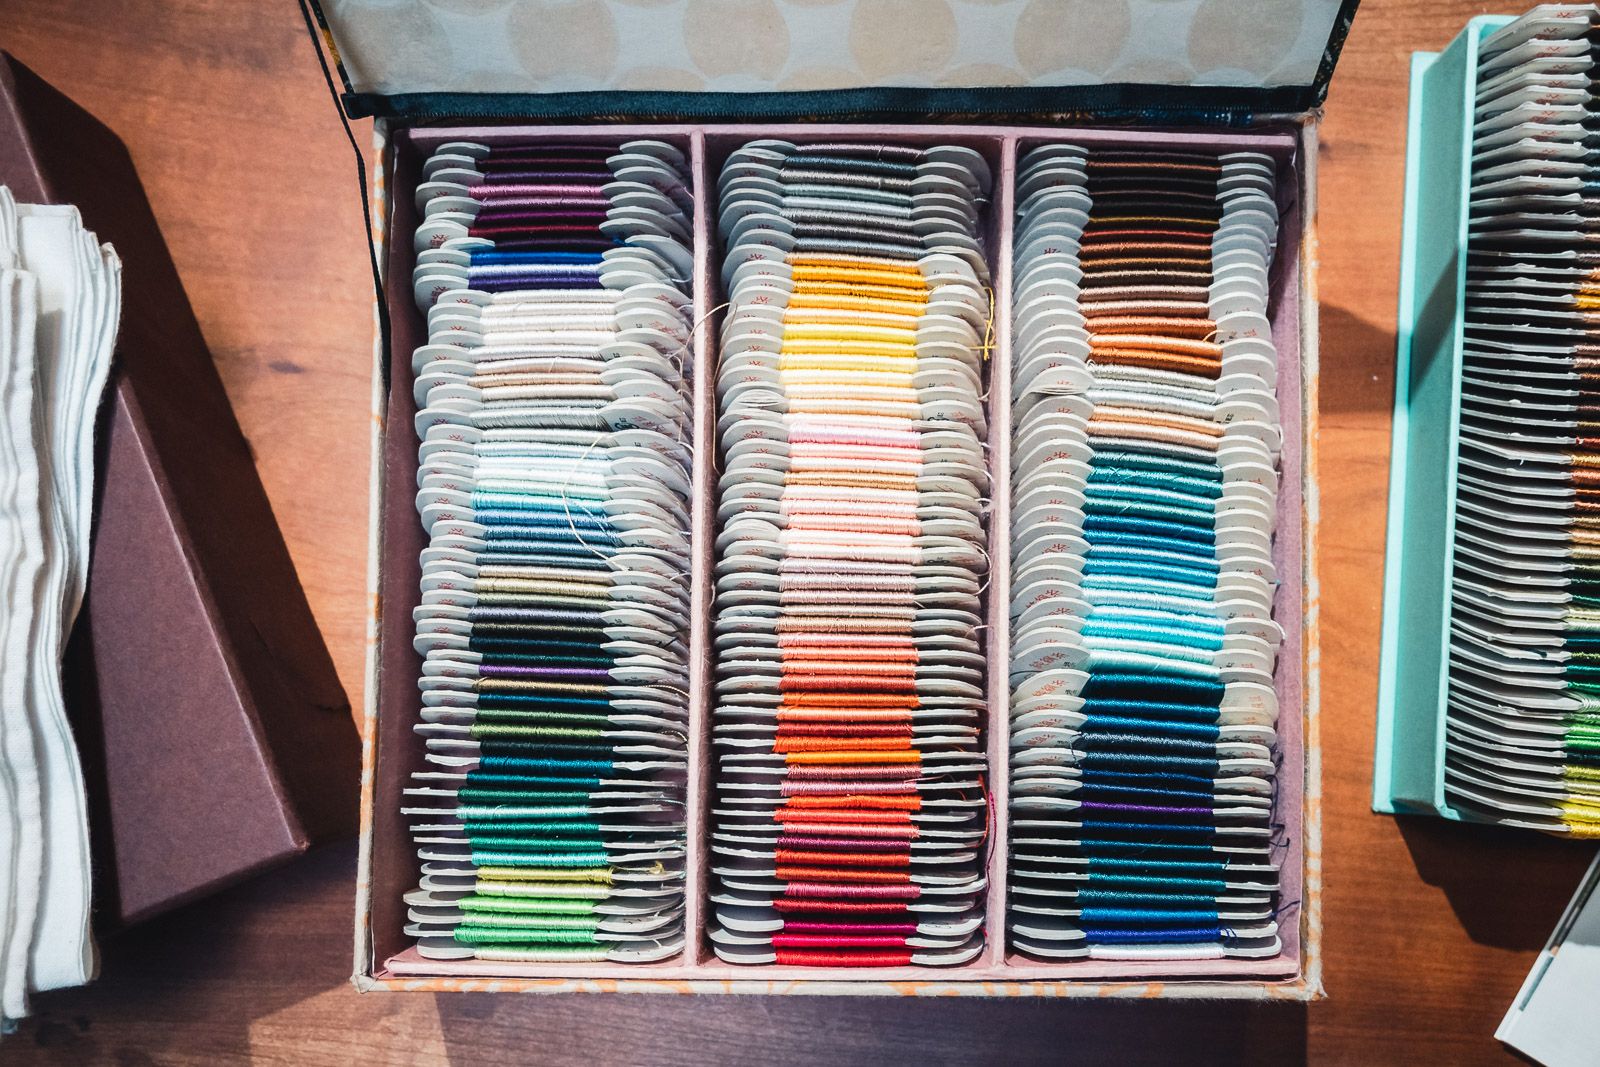 Silk thread on cards in more than 100 different colors stored in a box